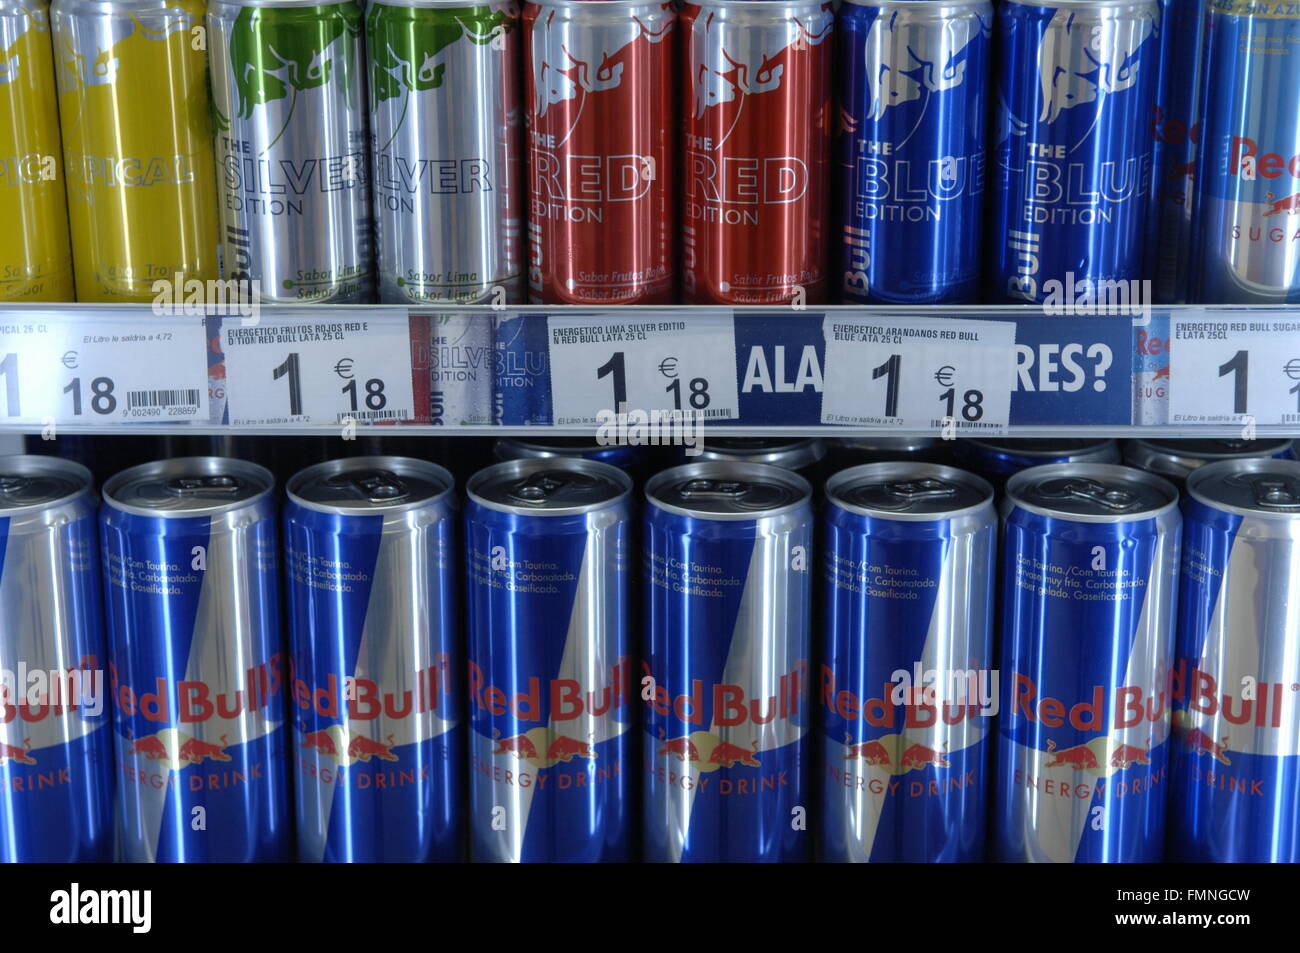 Red Bull is an energy drink sold by Austrian company Red Bull GmbH, created  in 1987 Stock Photo - Alamy